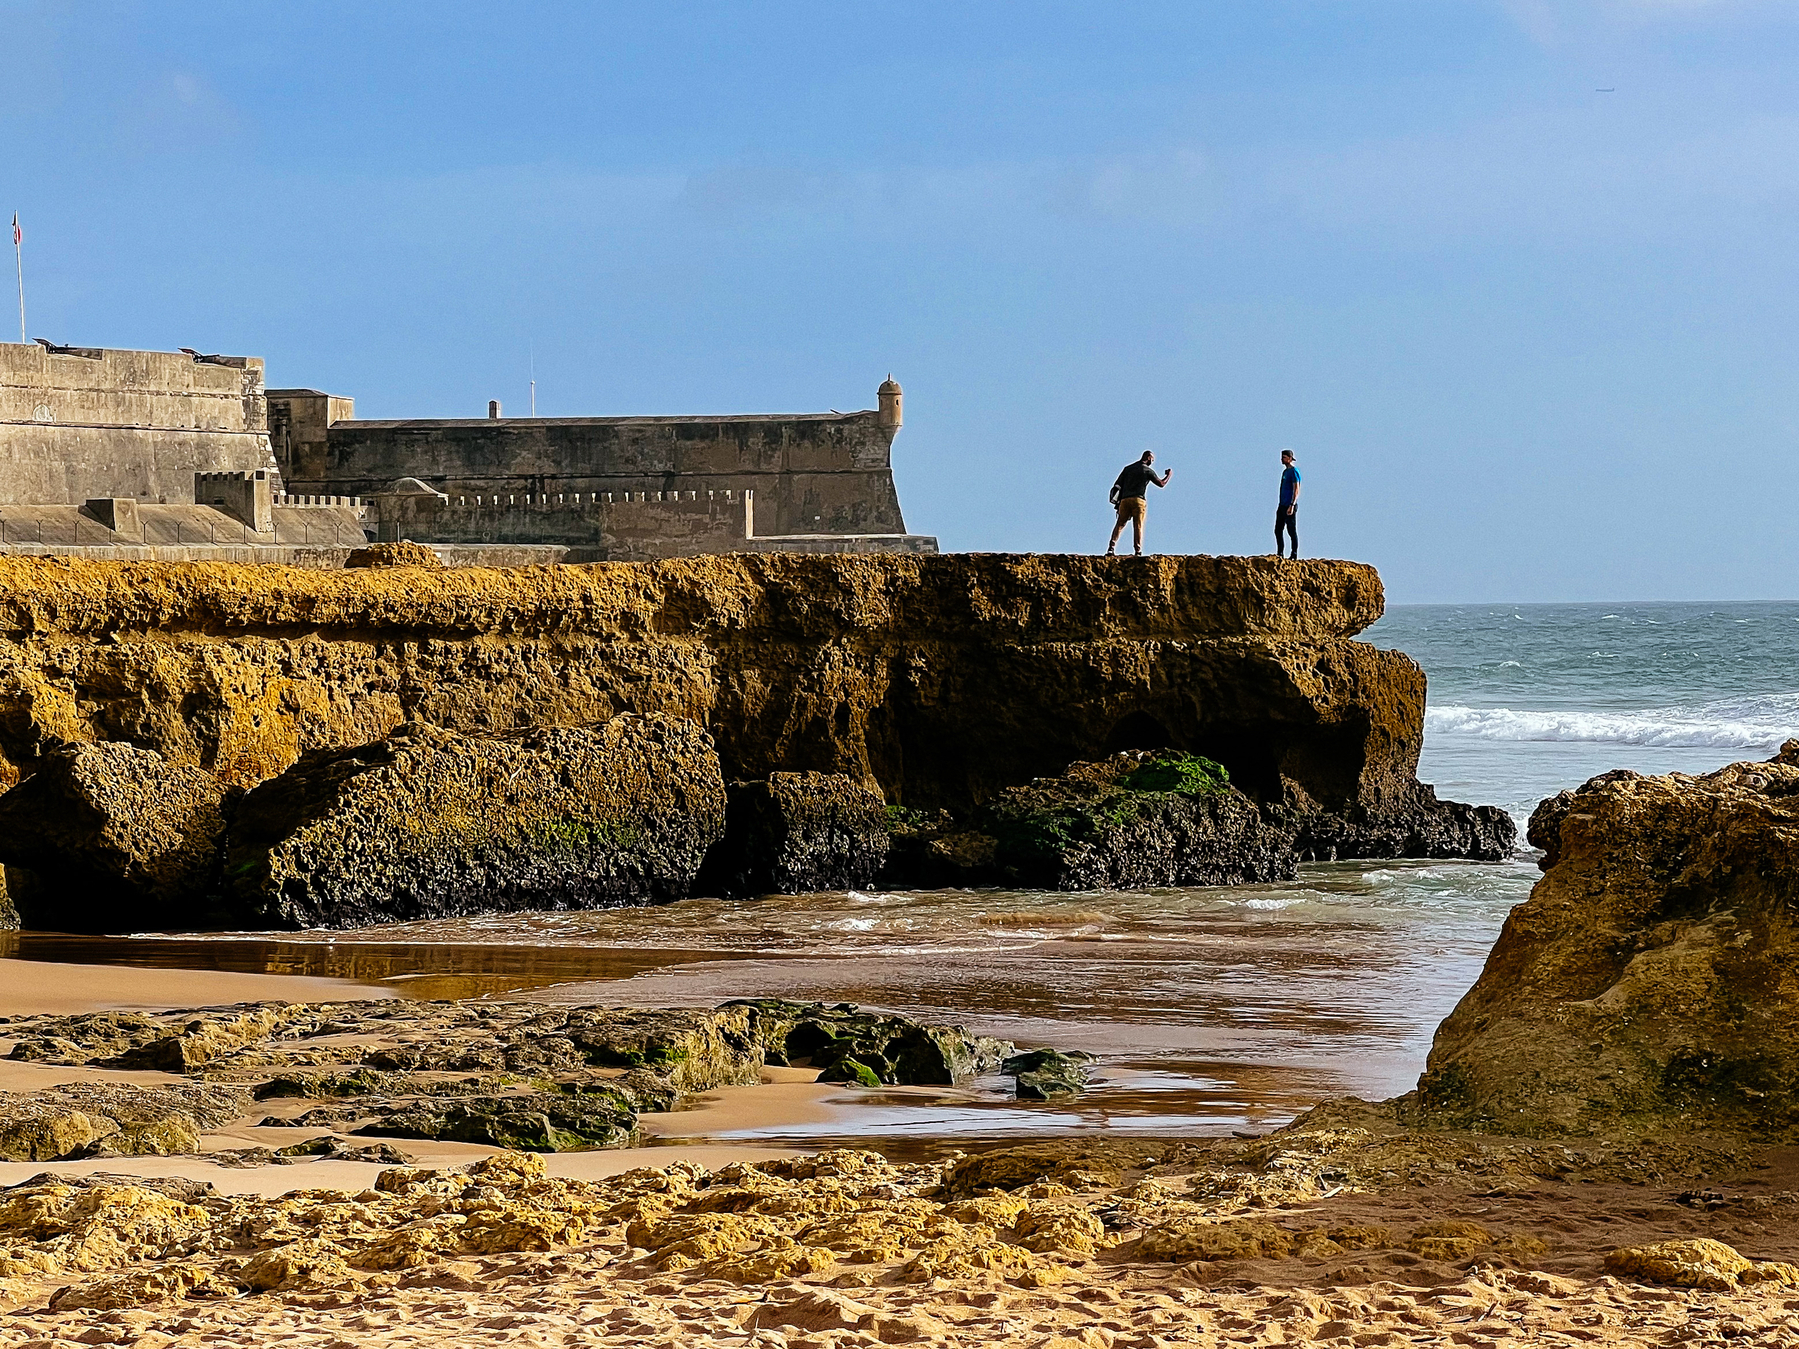 Men takes photos by the sea, with a fort in the background 